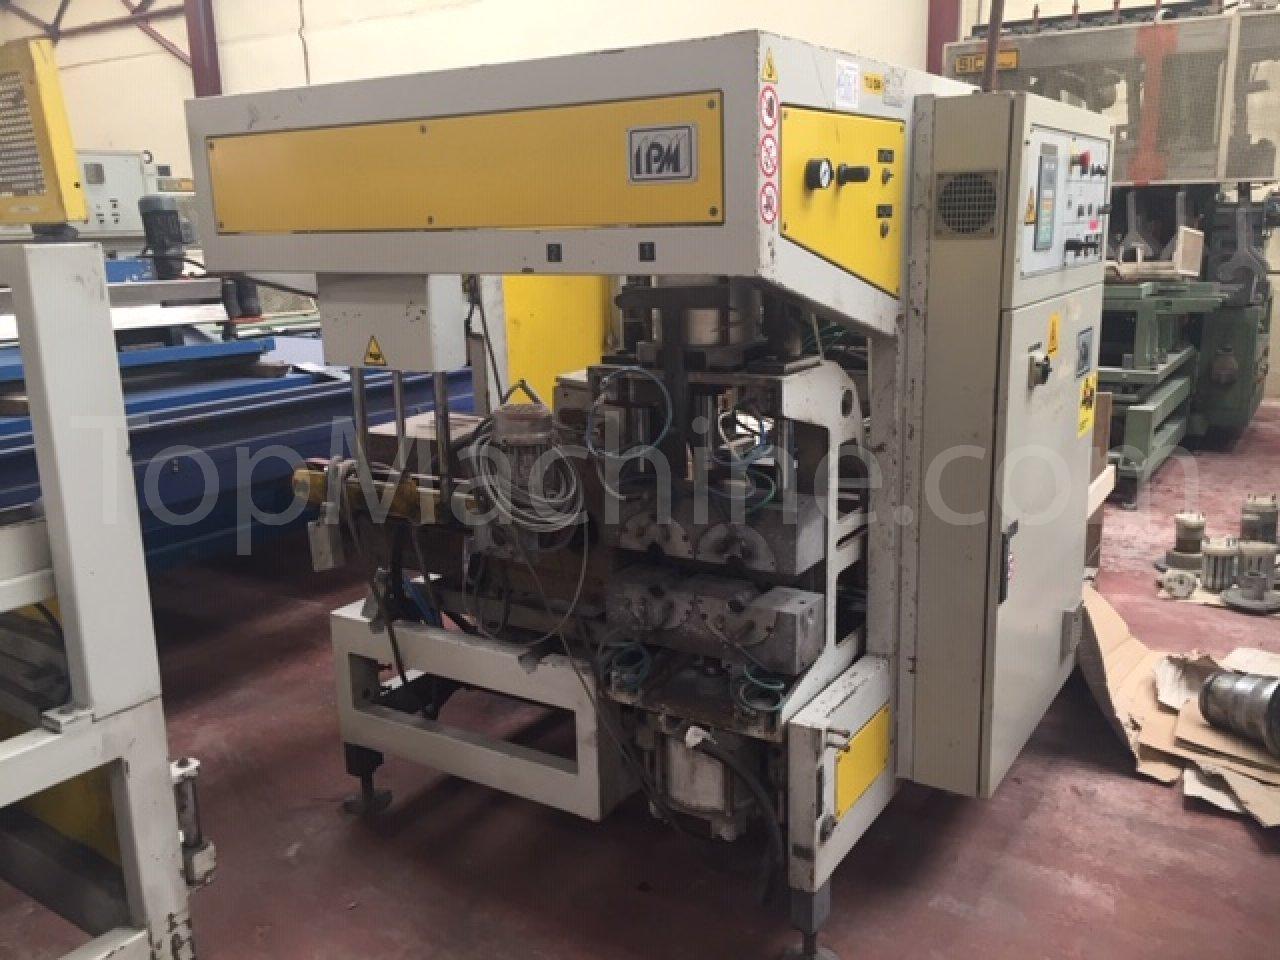 Used IPM BA 125 D Extrusion Belling machine